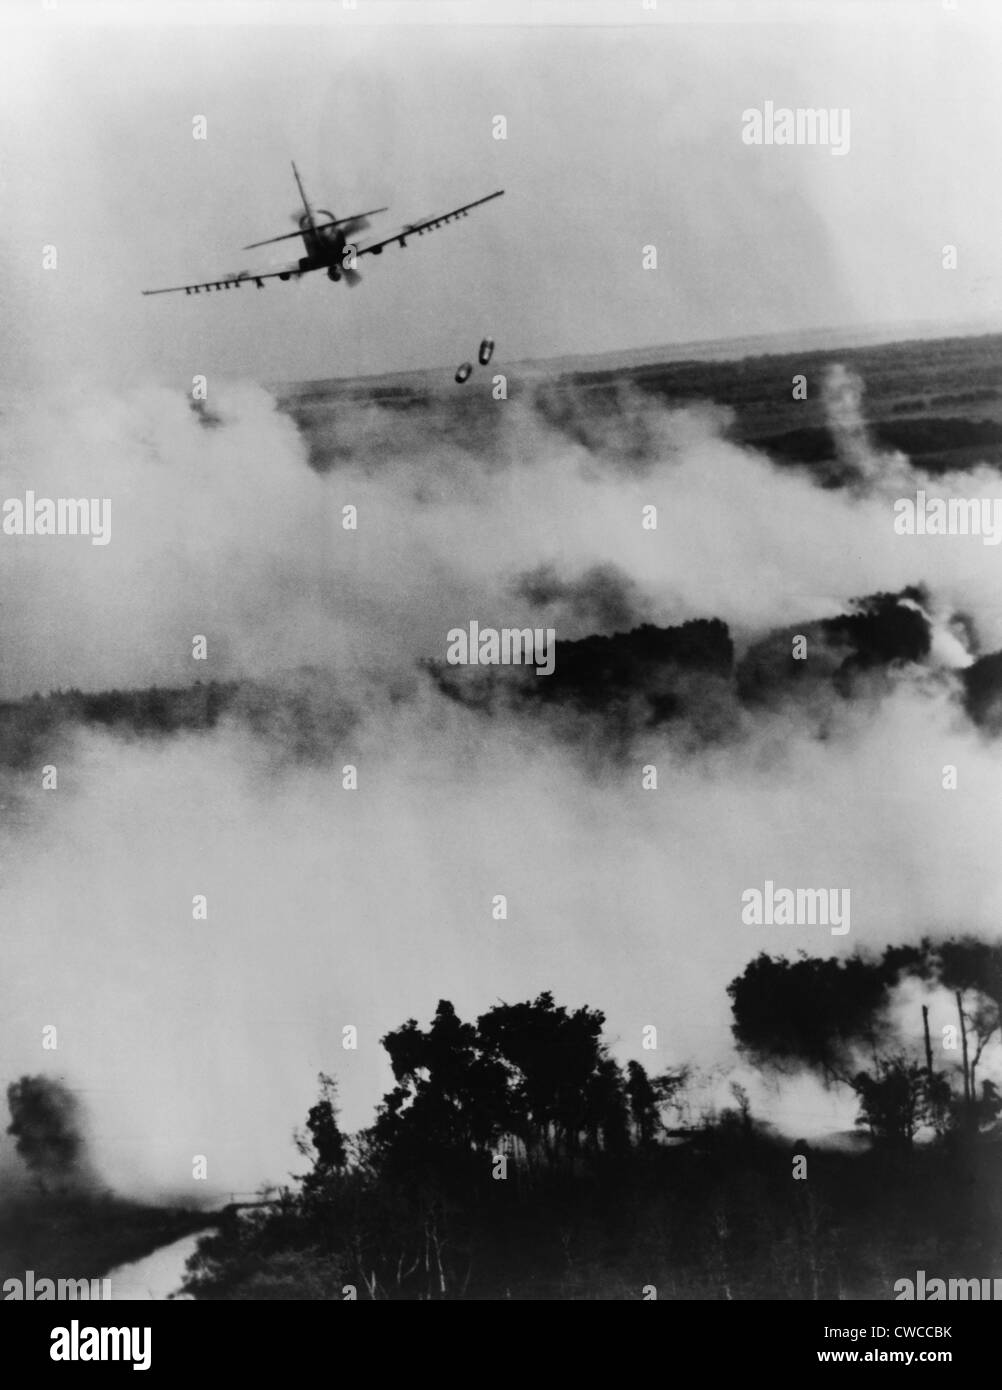 Vietnam War bombing. Two bombs fall from a Vietnamese Air Force A-1E Skyraider over a burning Viet Cong hideout near Cantho, Stock Photo